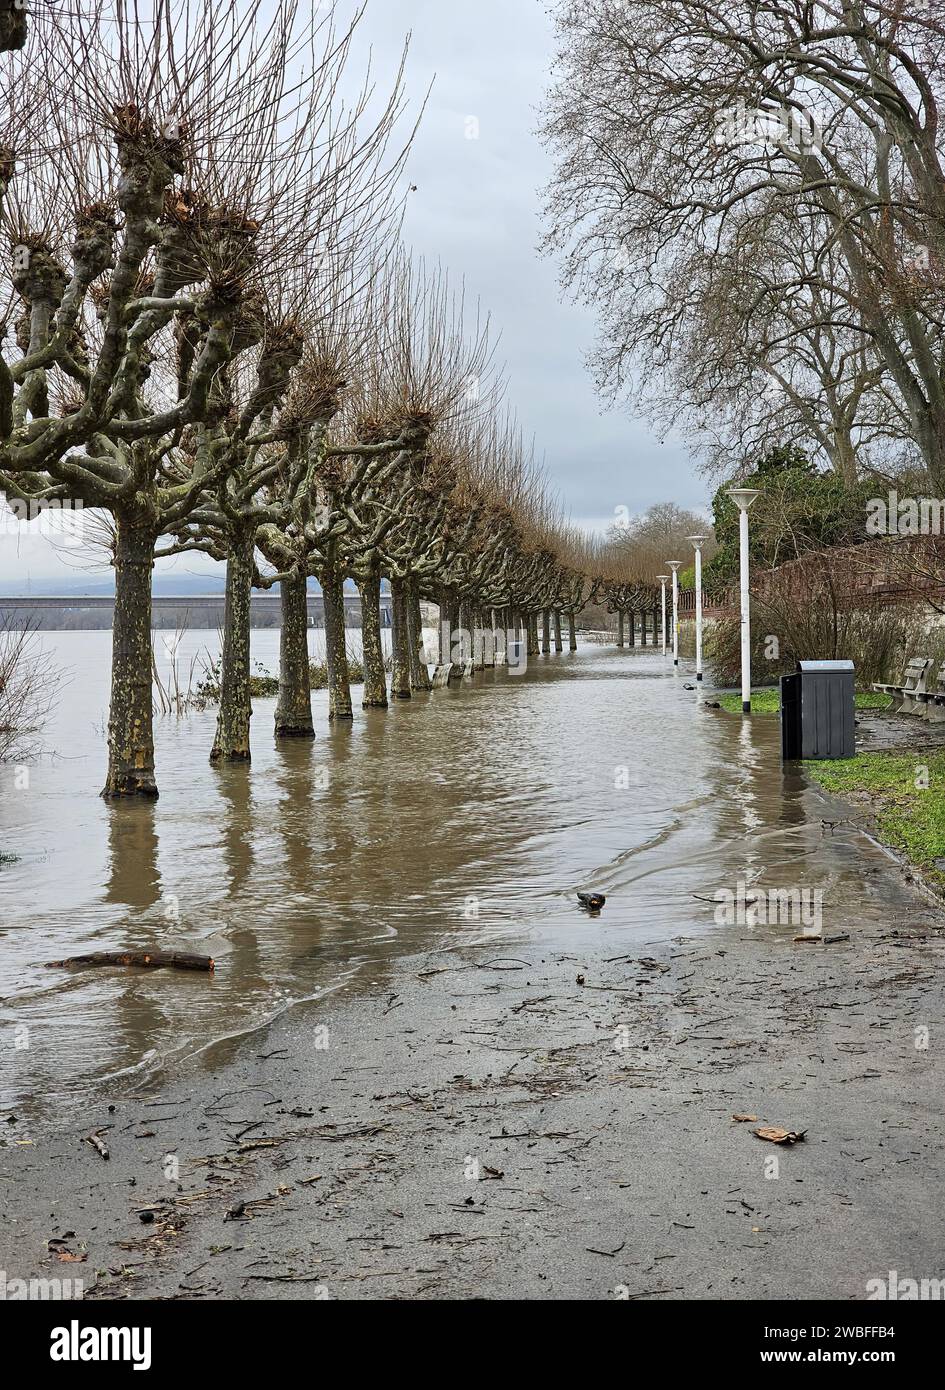 Flooding from the Main Promenade on the river bank in Wiesbaden Stock Photo